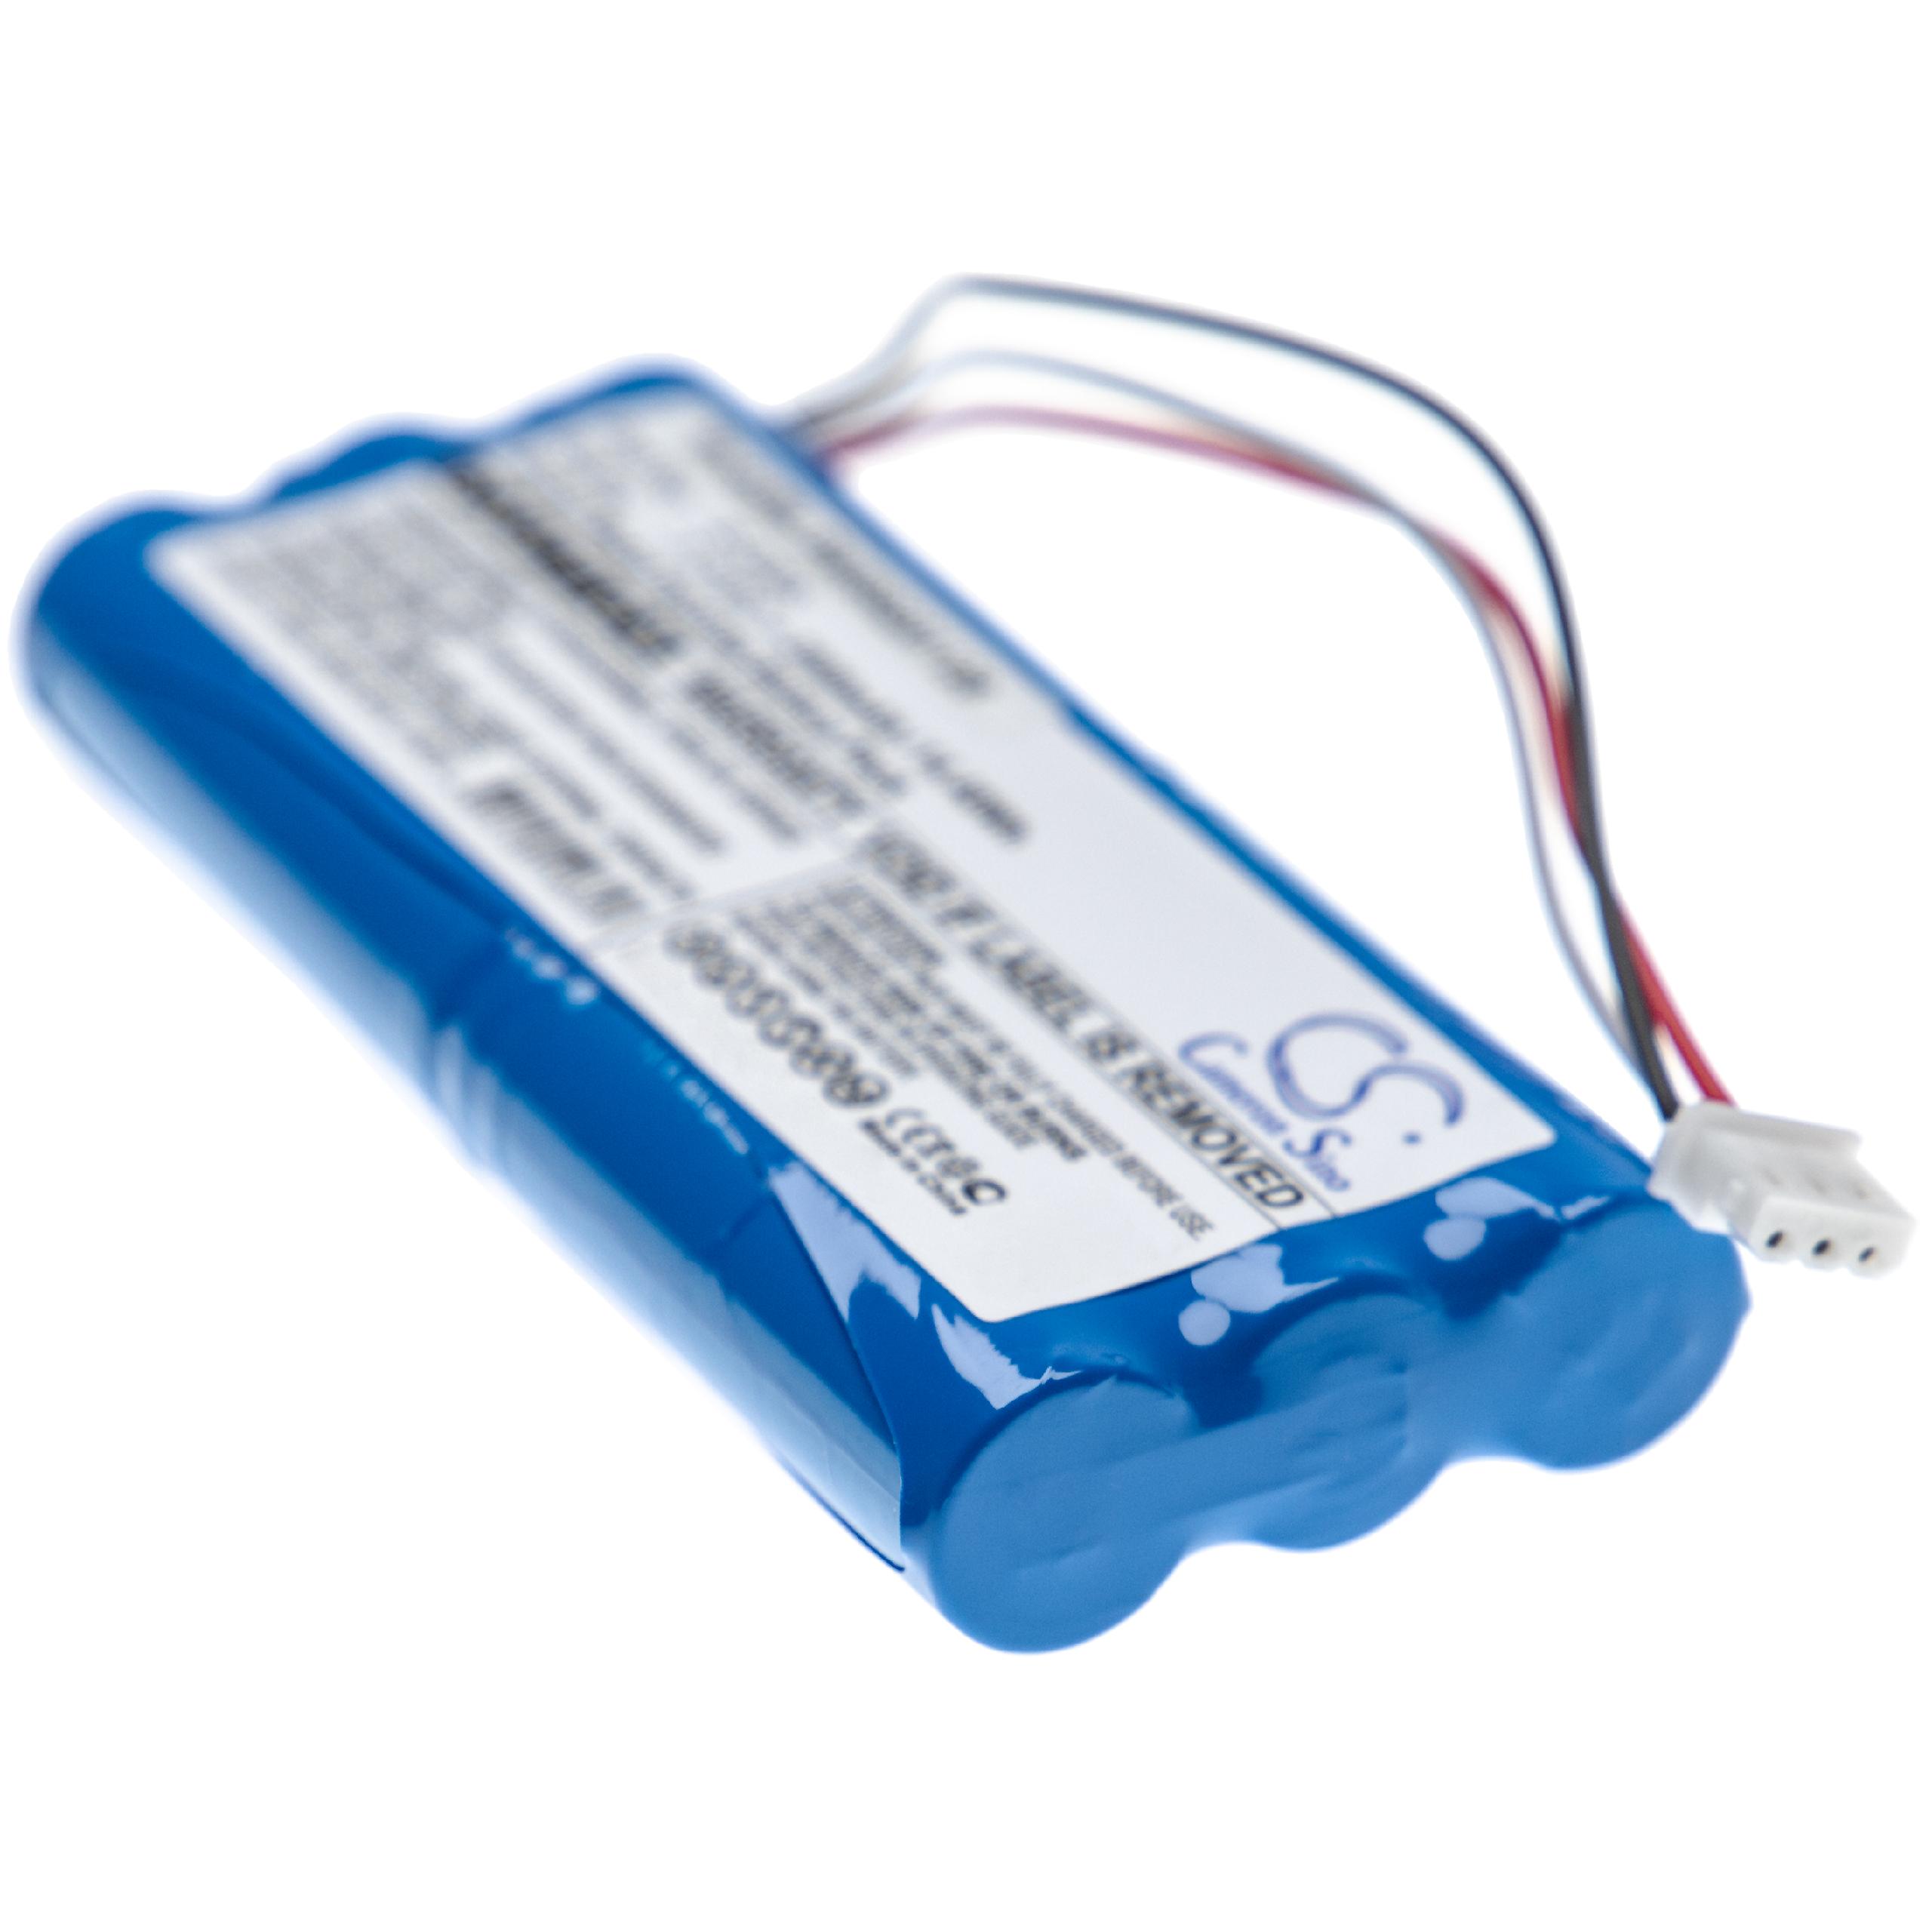 Laser Battery Replacement for Aaronia E-0205, ACE604396 2S1P - 2000mAh 7.2V NiMH